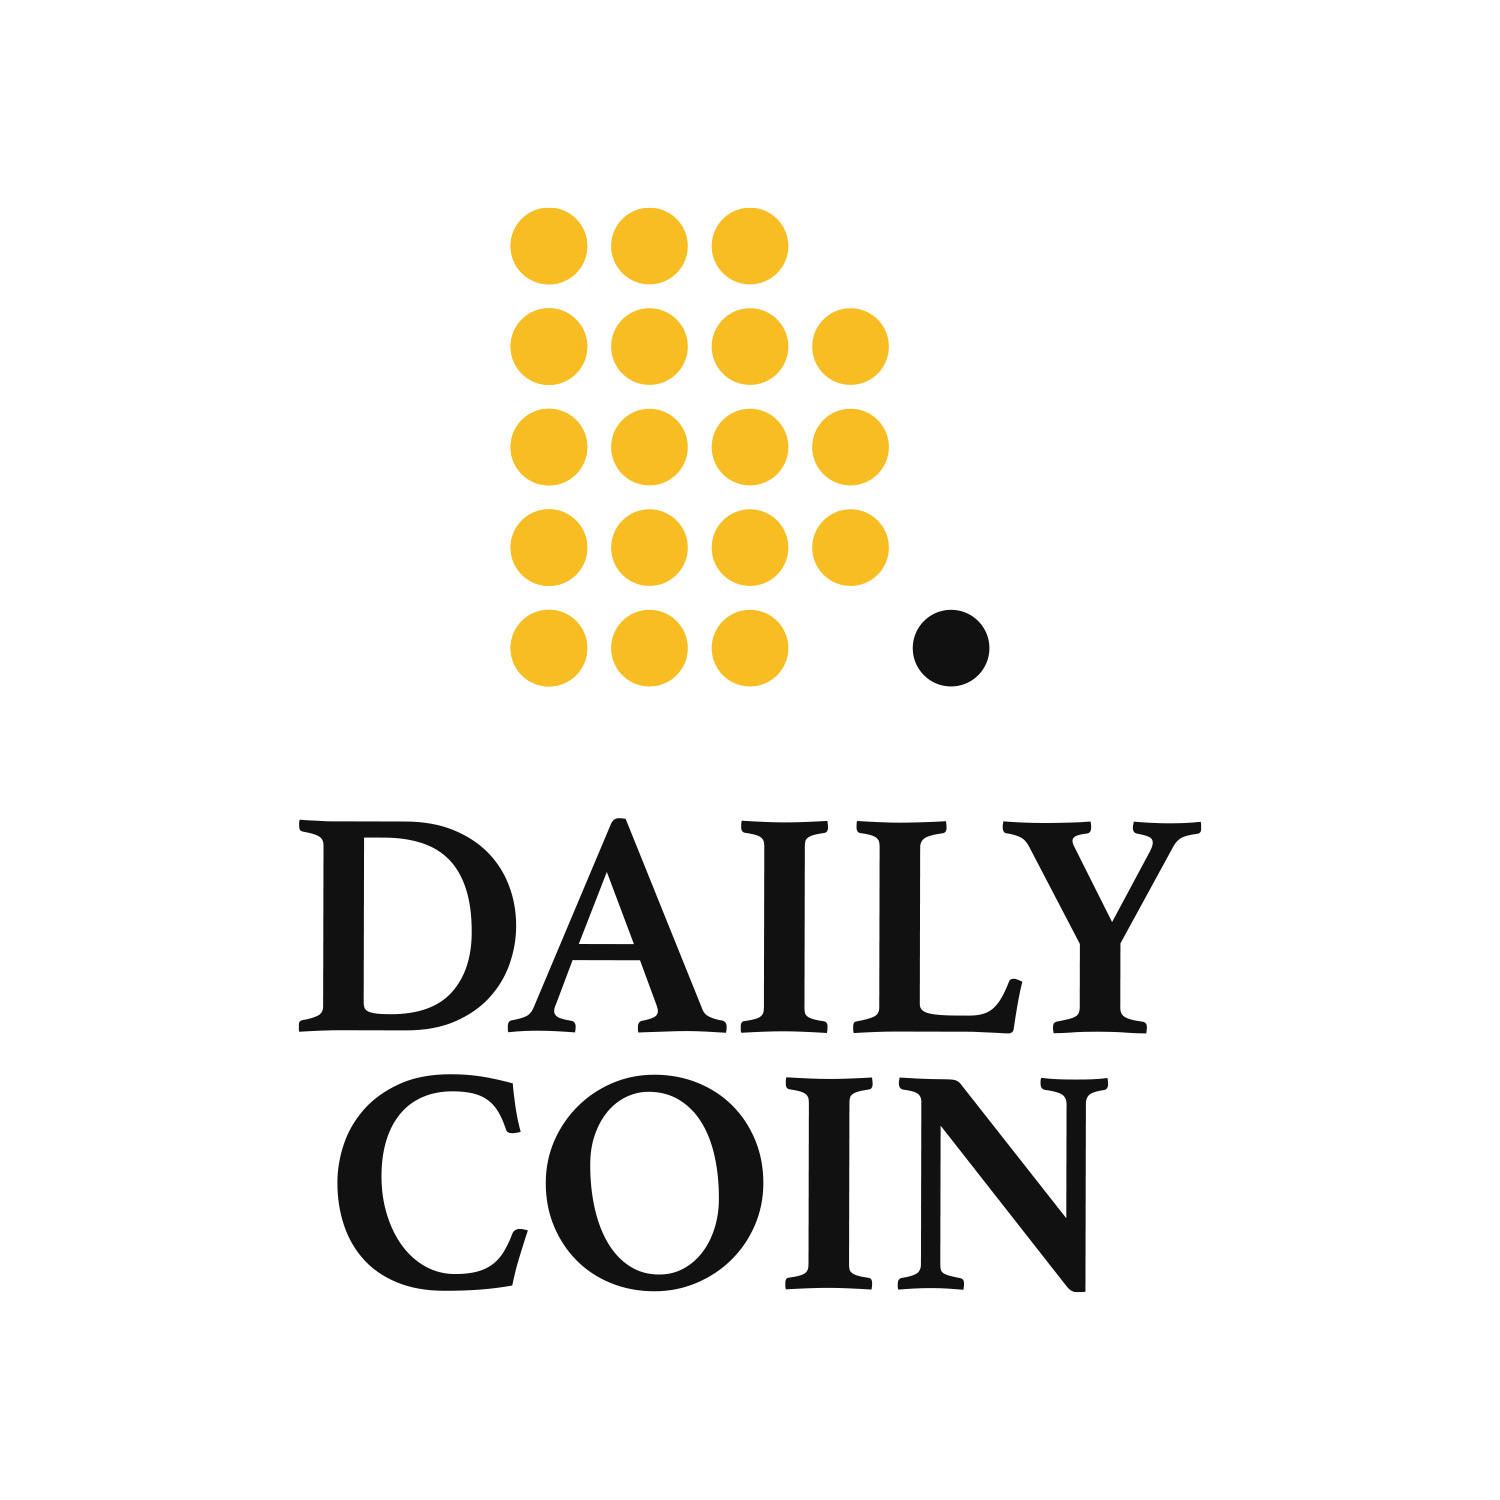 Dailycoin